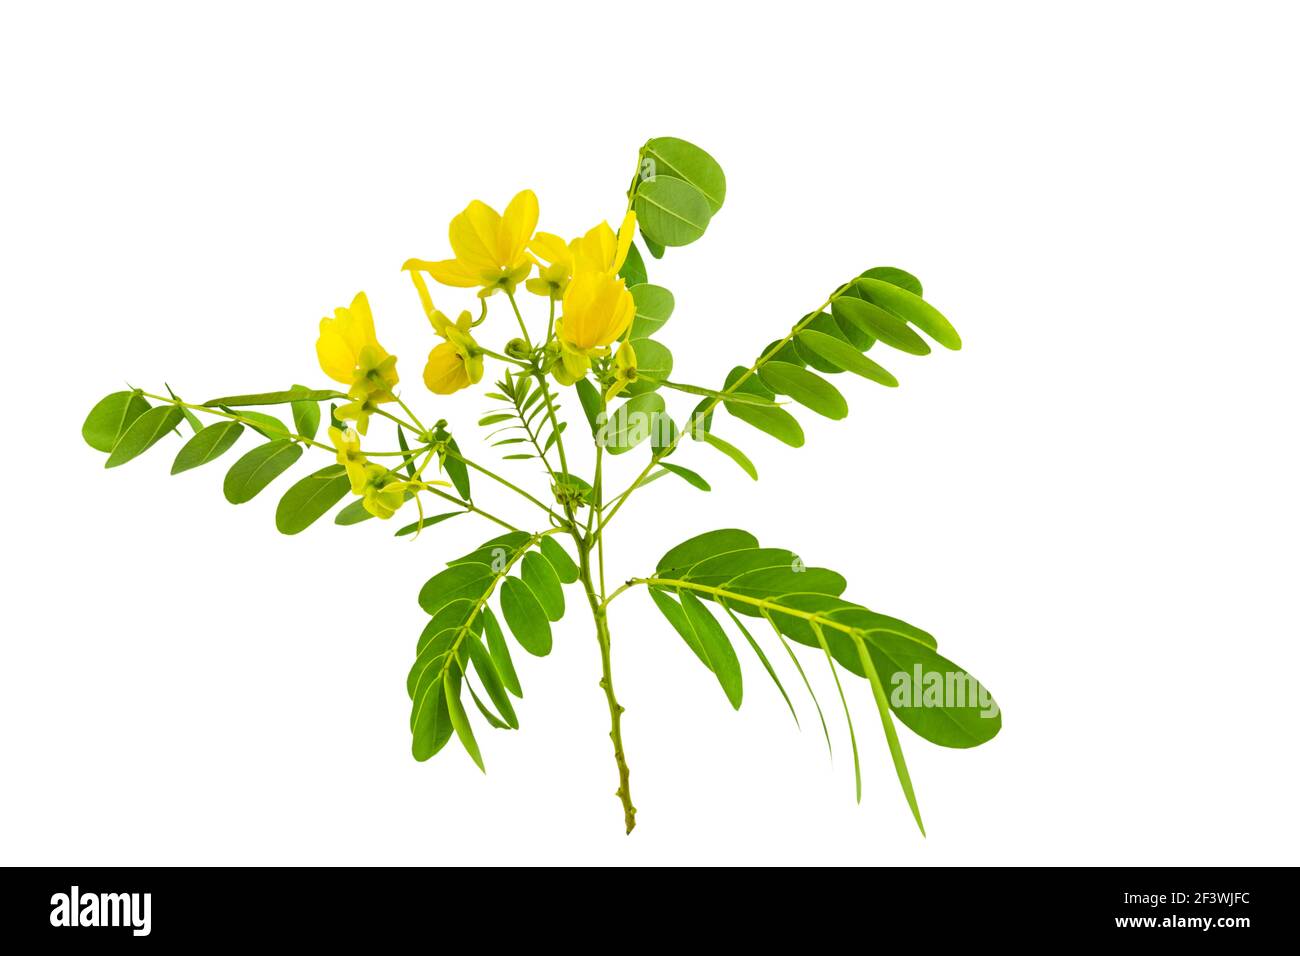 Closed up yellow flower American Cassia or Golden Wonder isolated on white background.Saved with clipping path. Stock Photo